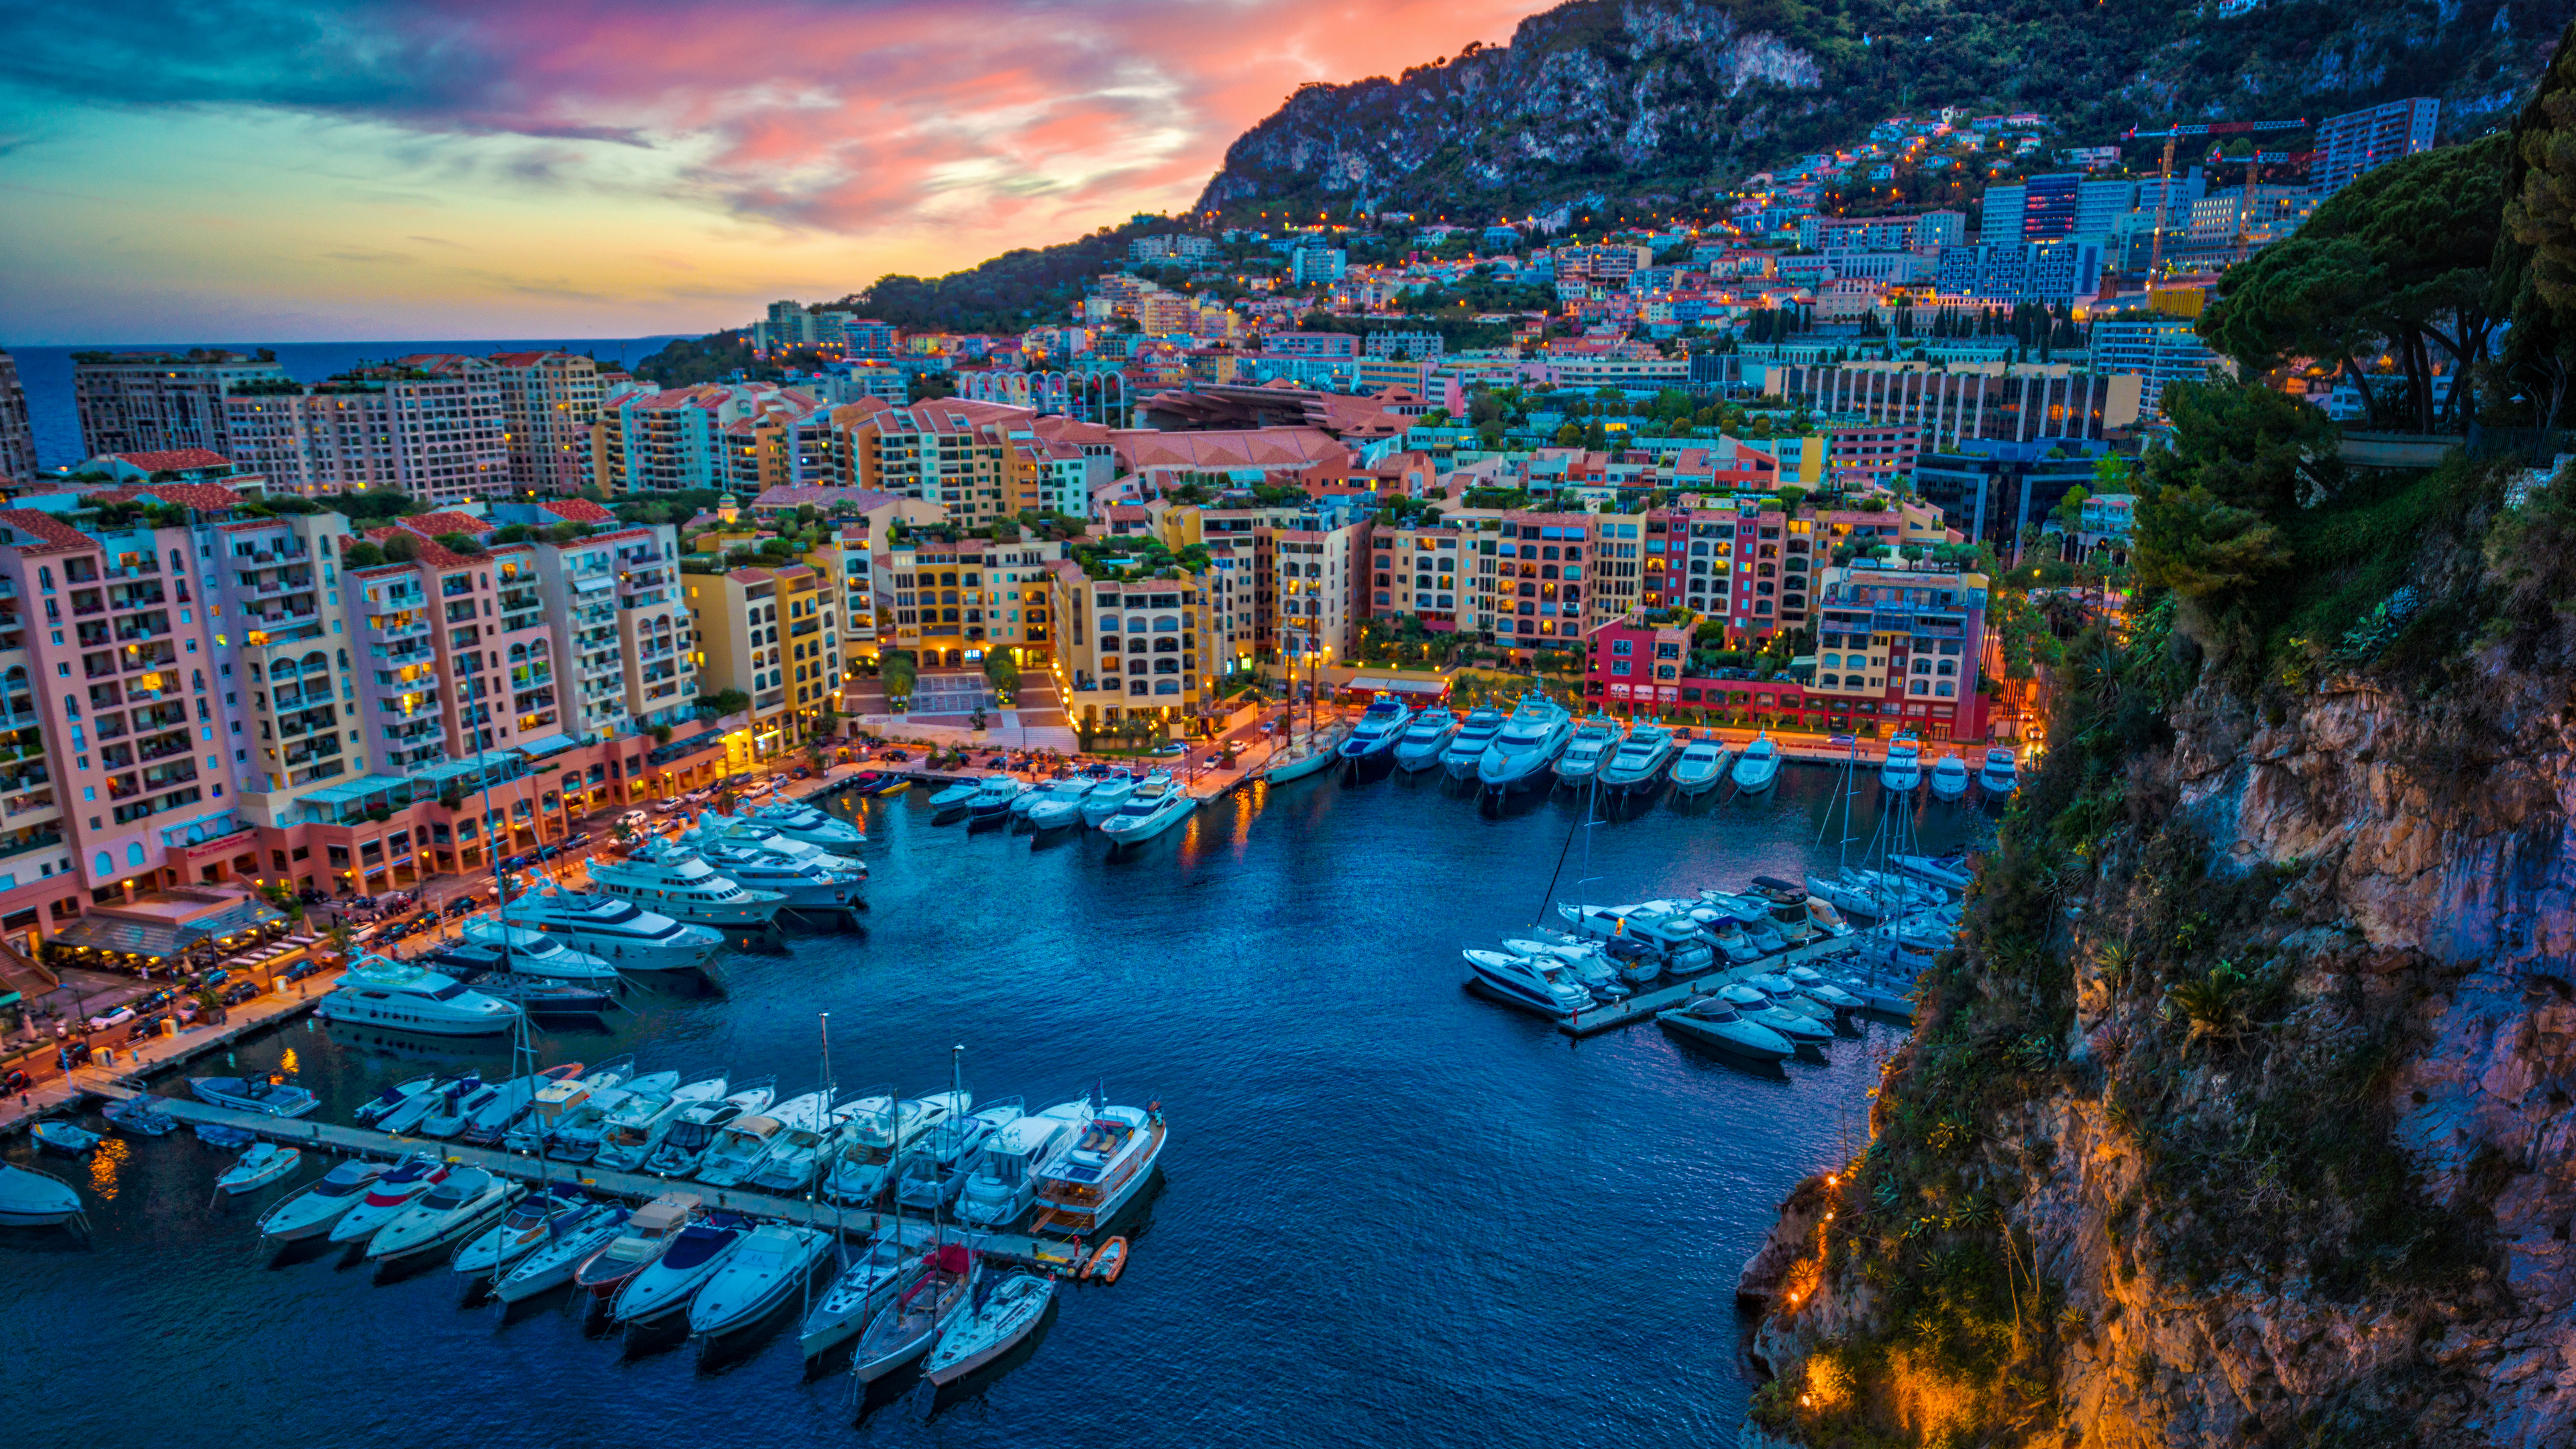 General 3840x2160 Trey Ratcliff photography cityscape Monaco building water yacht hills mountains trees sky clouds bay city dock rocks 4K